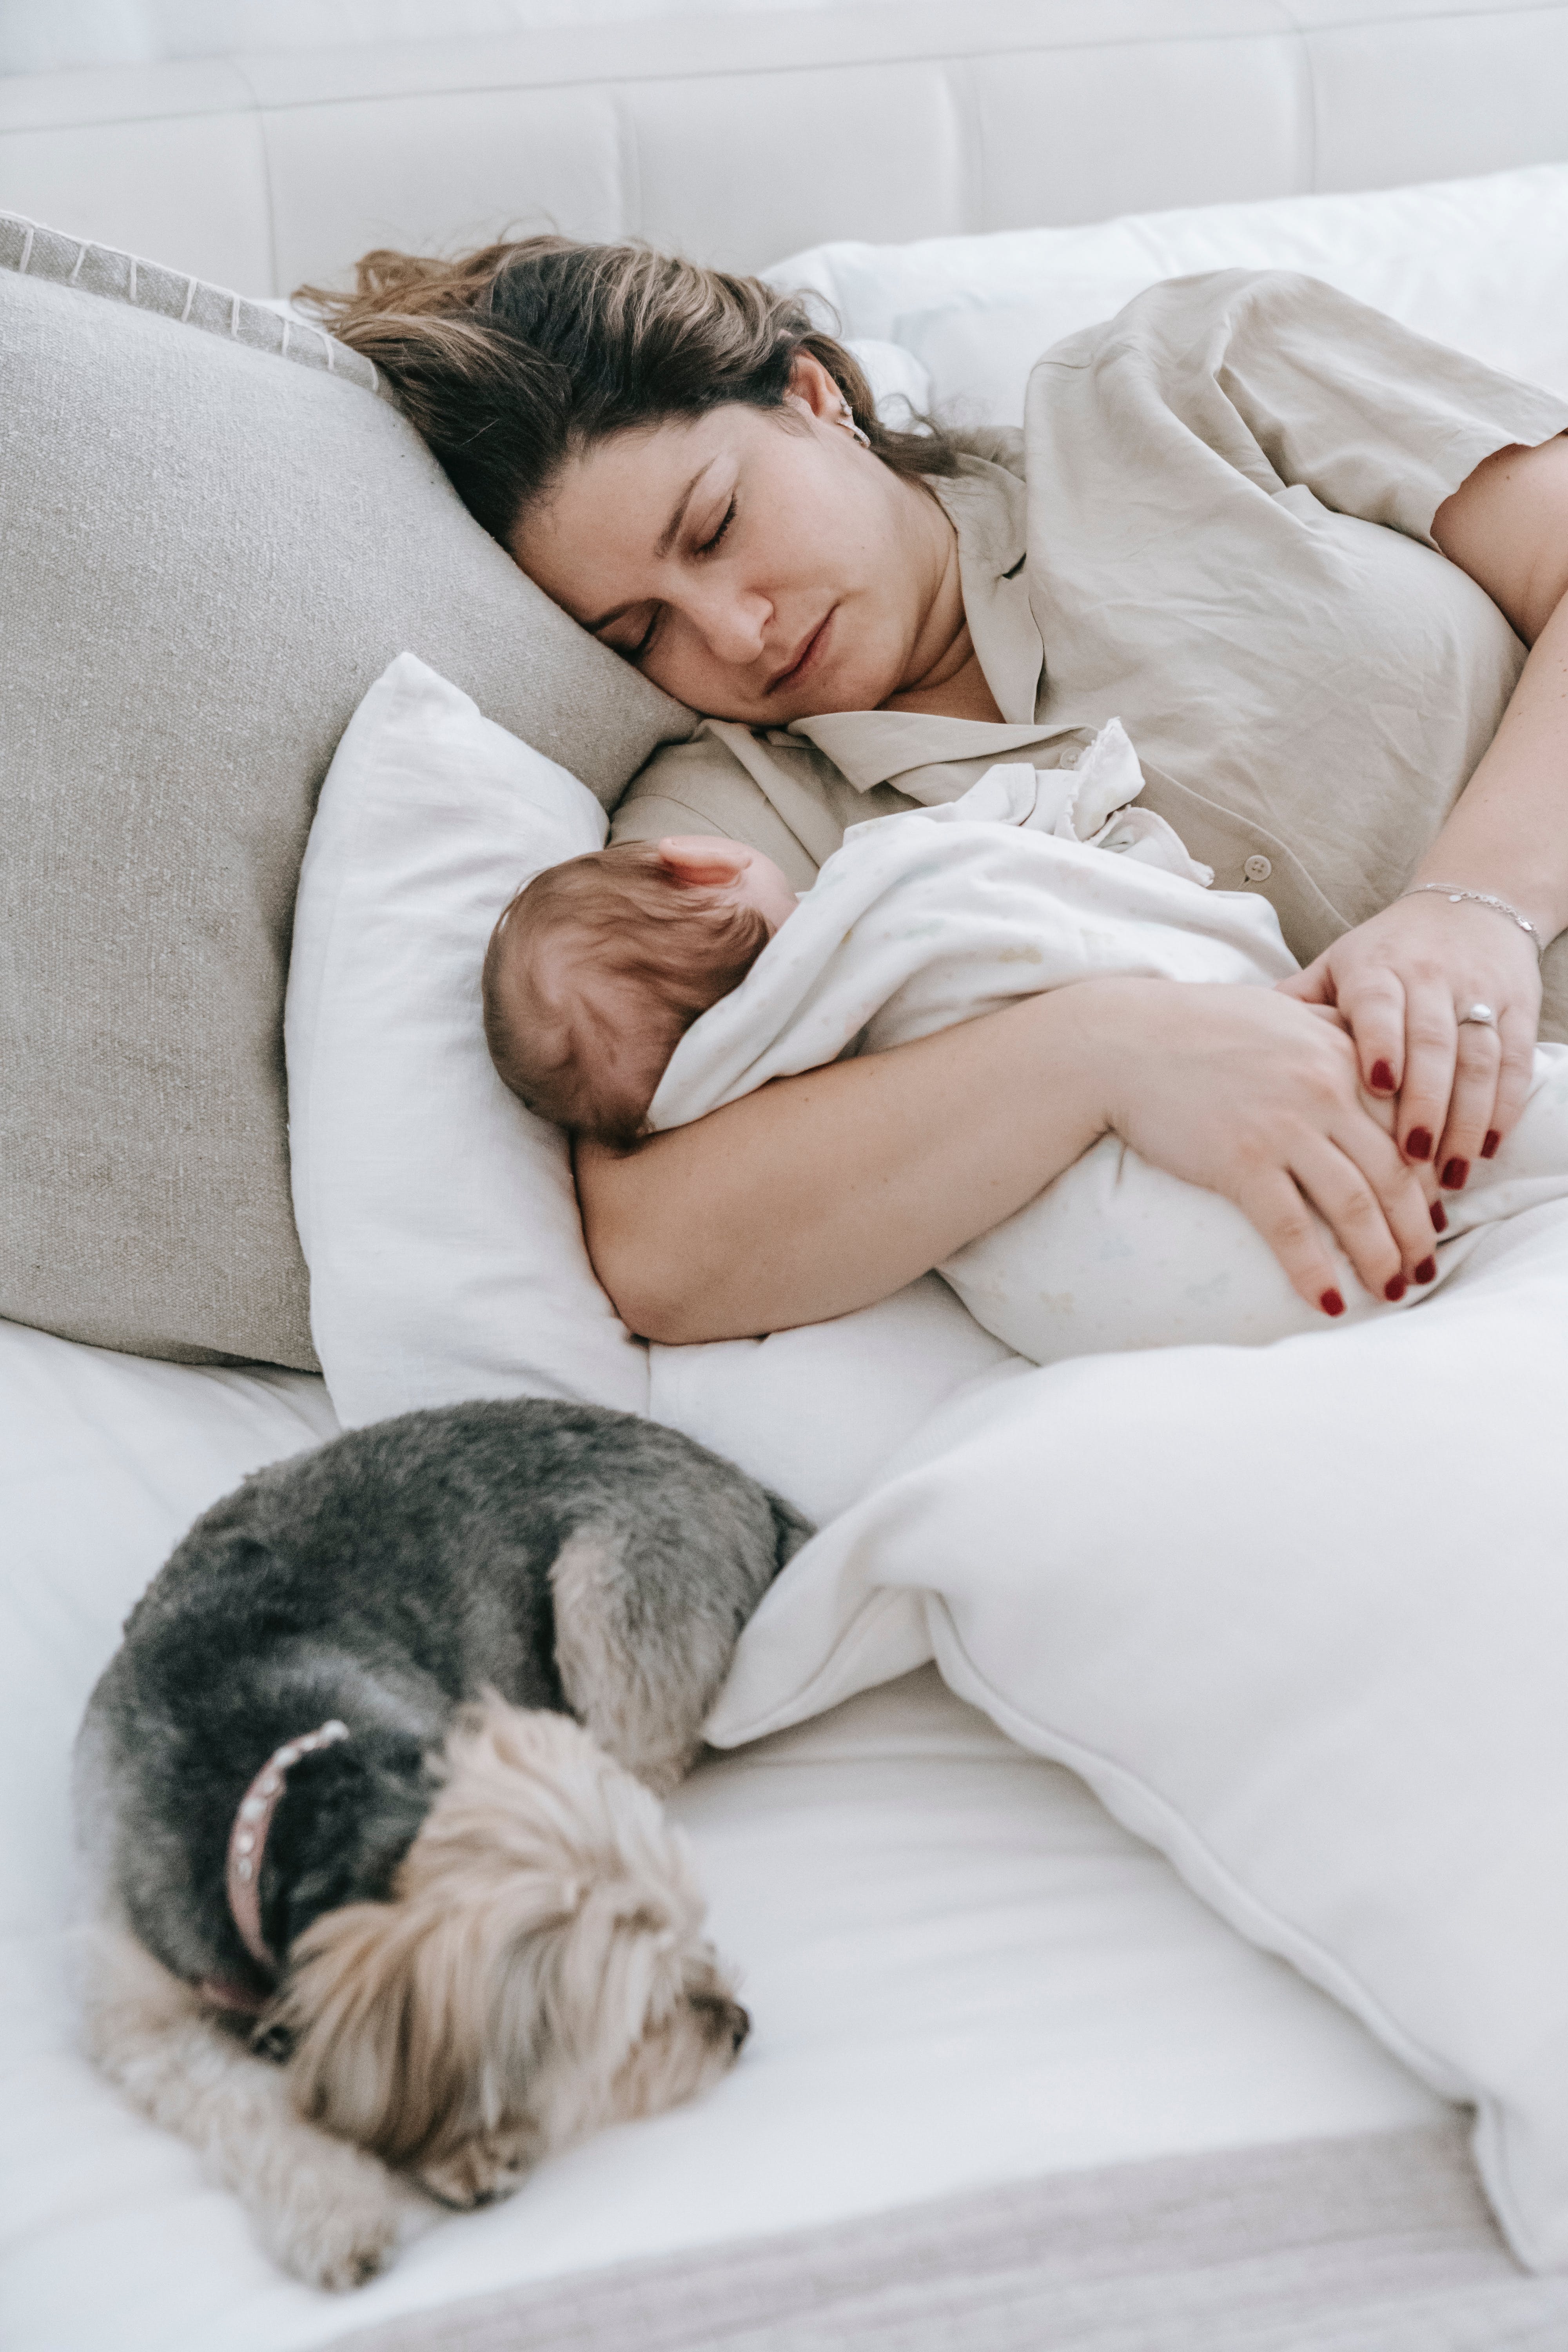 A peaceful scene of a new mom and her baby sleeping soundly on a bed, with a cute yorkie nearby. Soothing moments of rest and love